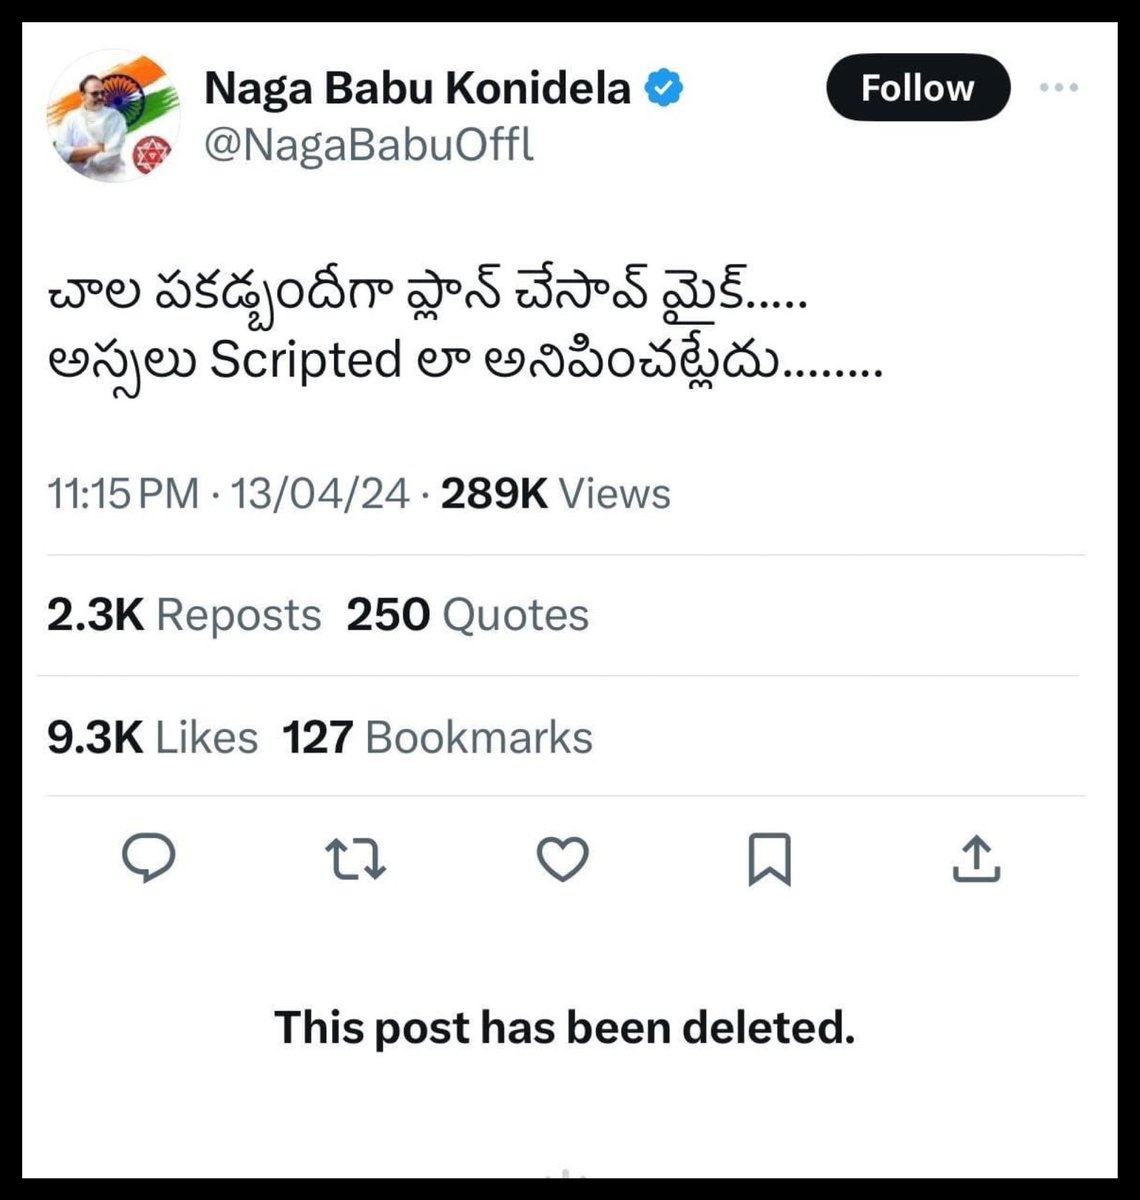 Tweet Deleted. 

This is why Nagababu Garu is known as an Ameturish politician.